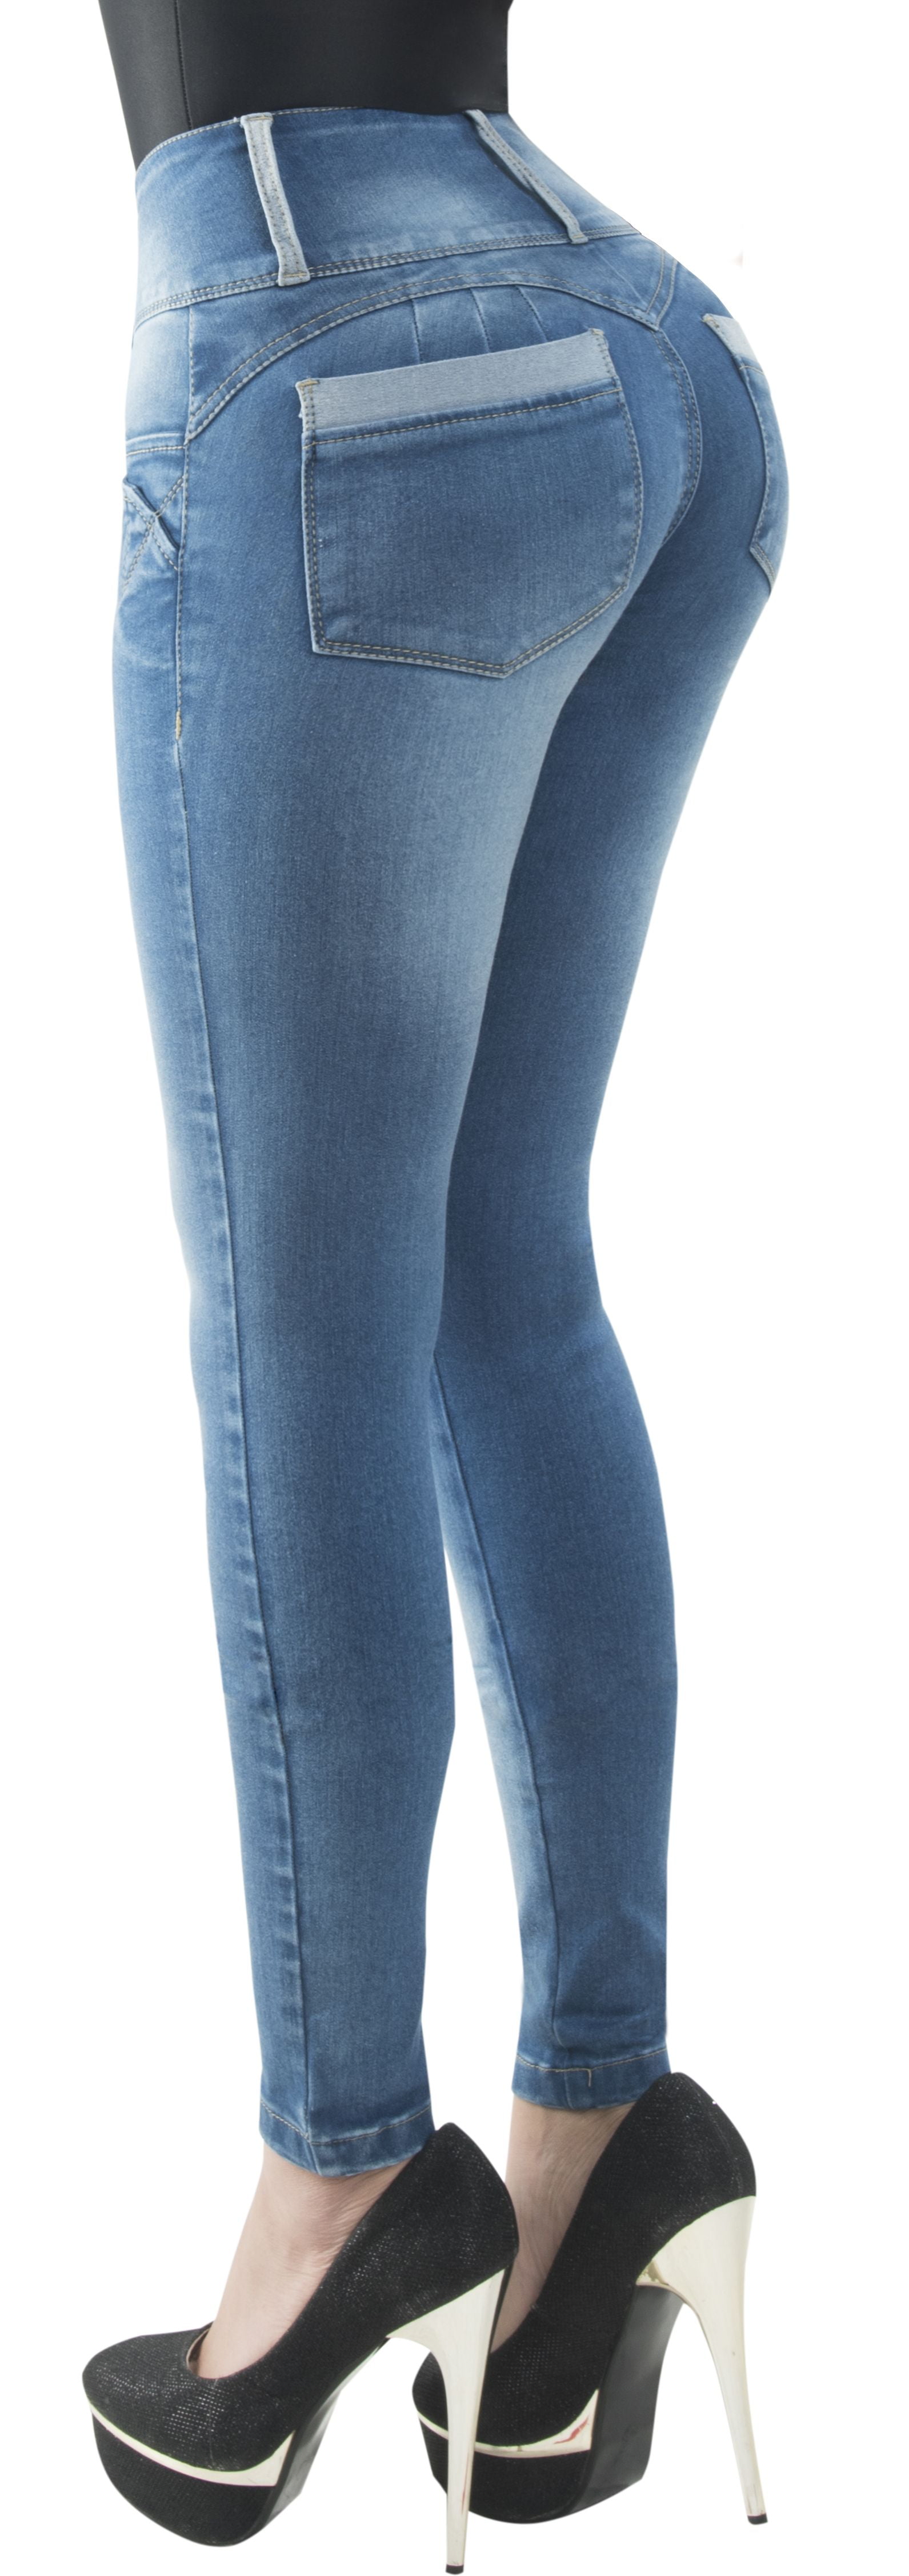 JEANS LEVANTA COLA COLLECTION FROM NICOLETTE SHAPEWEAR by